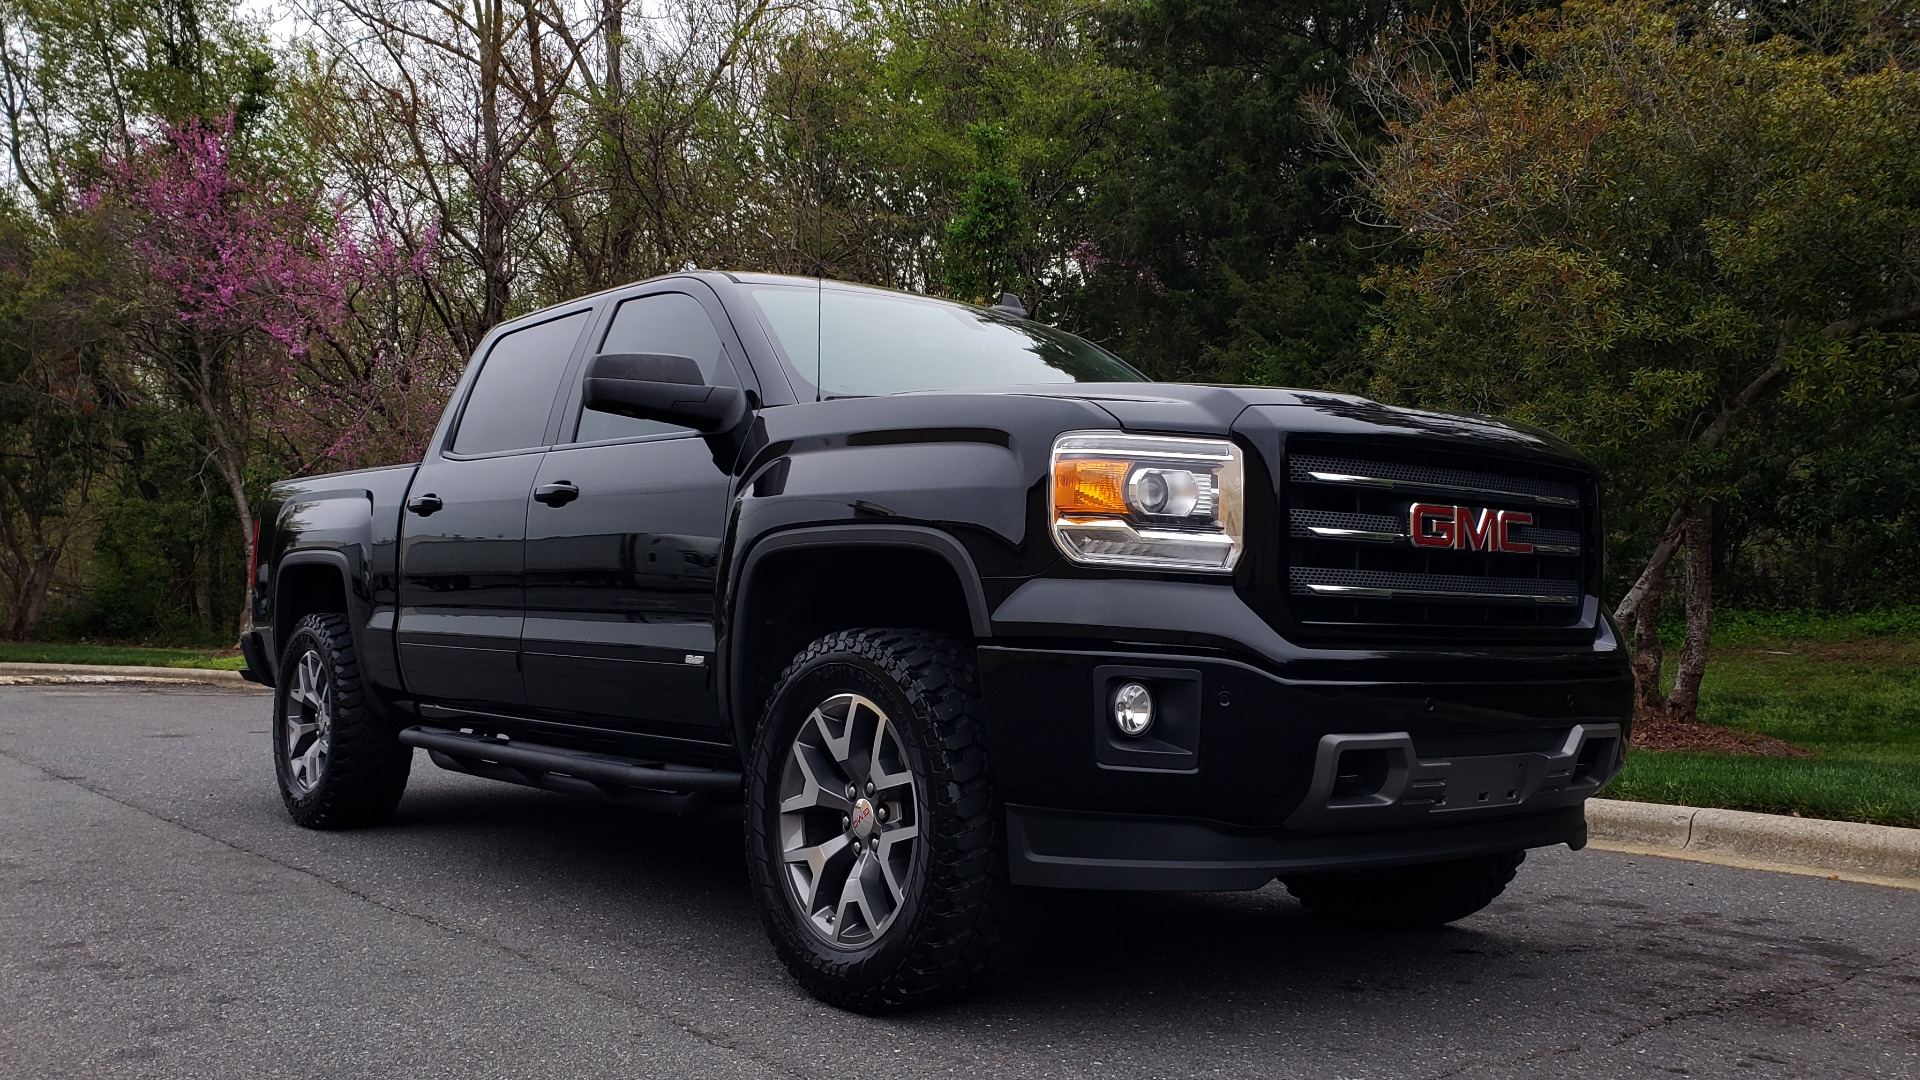 Used 2015 GMC SIERRA 1500 SLT 4WD CREW CAB / 6.2L V8 / NAV / BOSE / REARVIEW for sale Sold at Formula Imports in Charlotte NC 28227 4